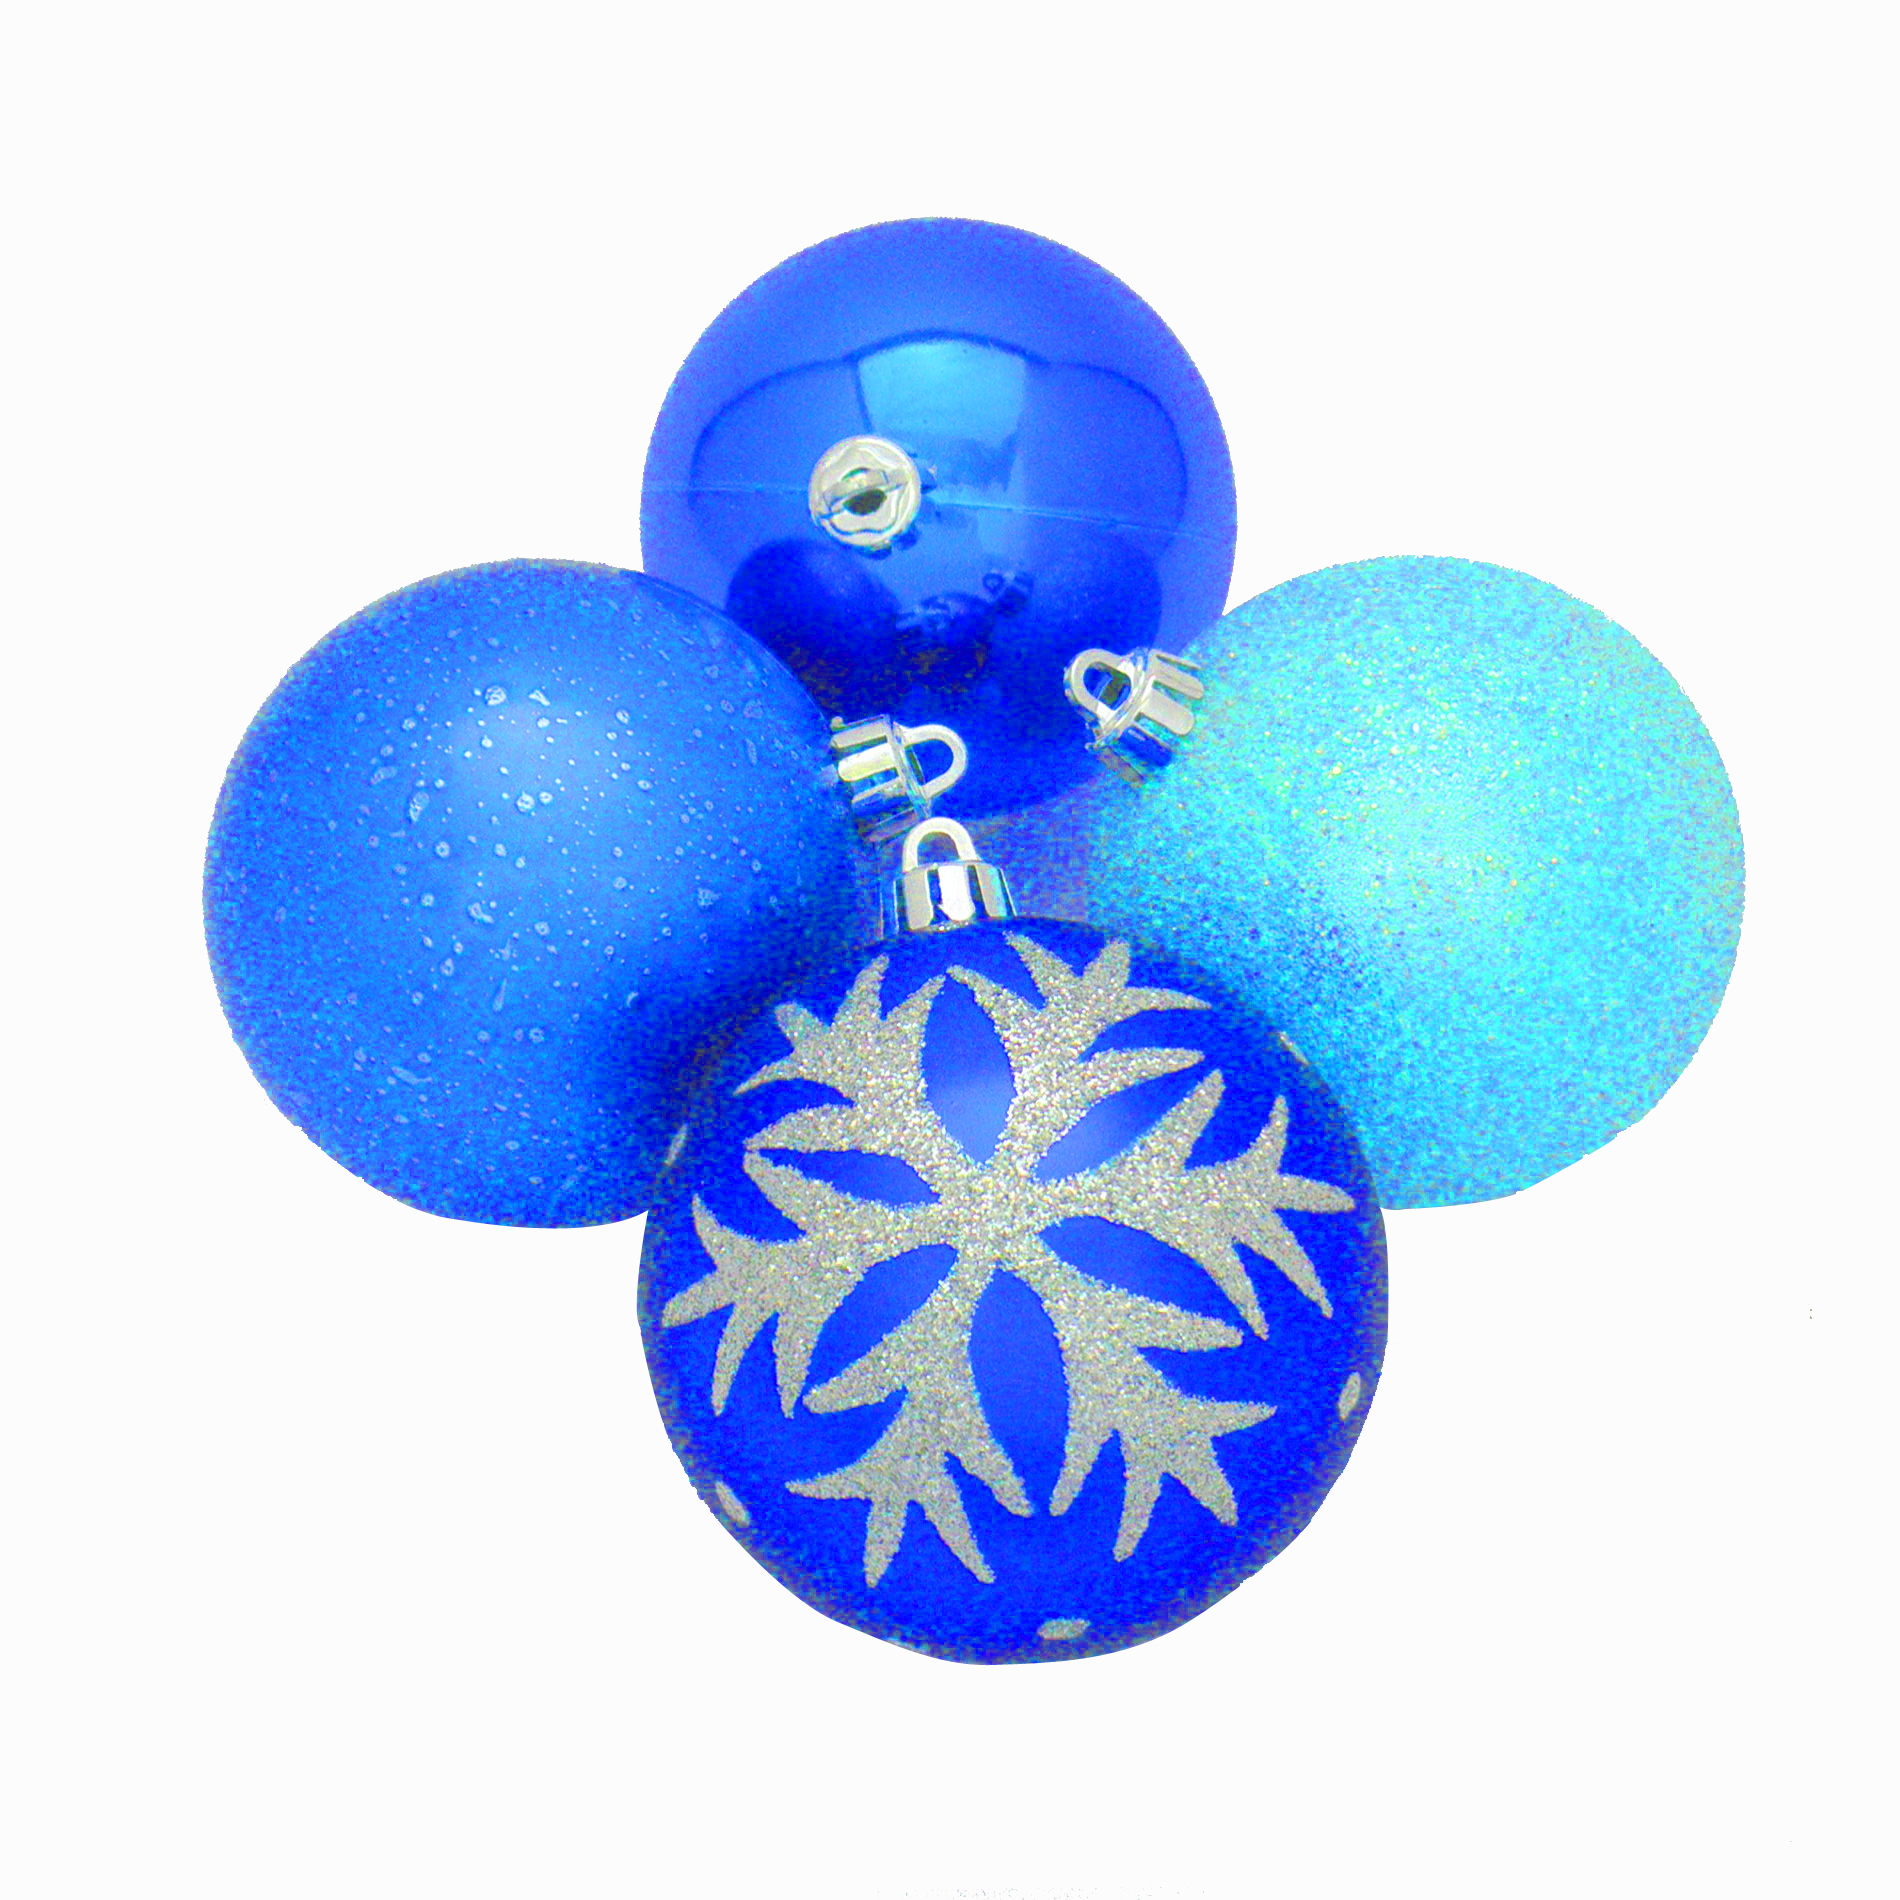 Trimming Traditions Shatterproof Ball Ornament, 24 ct.